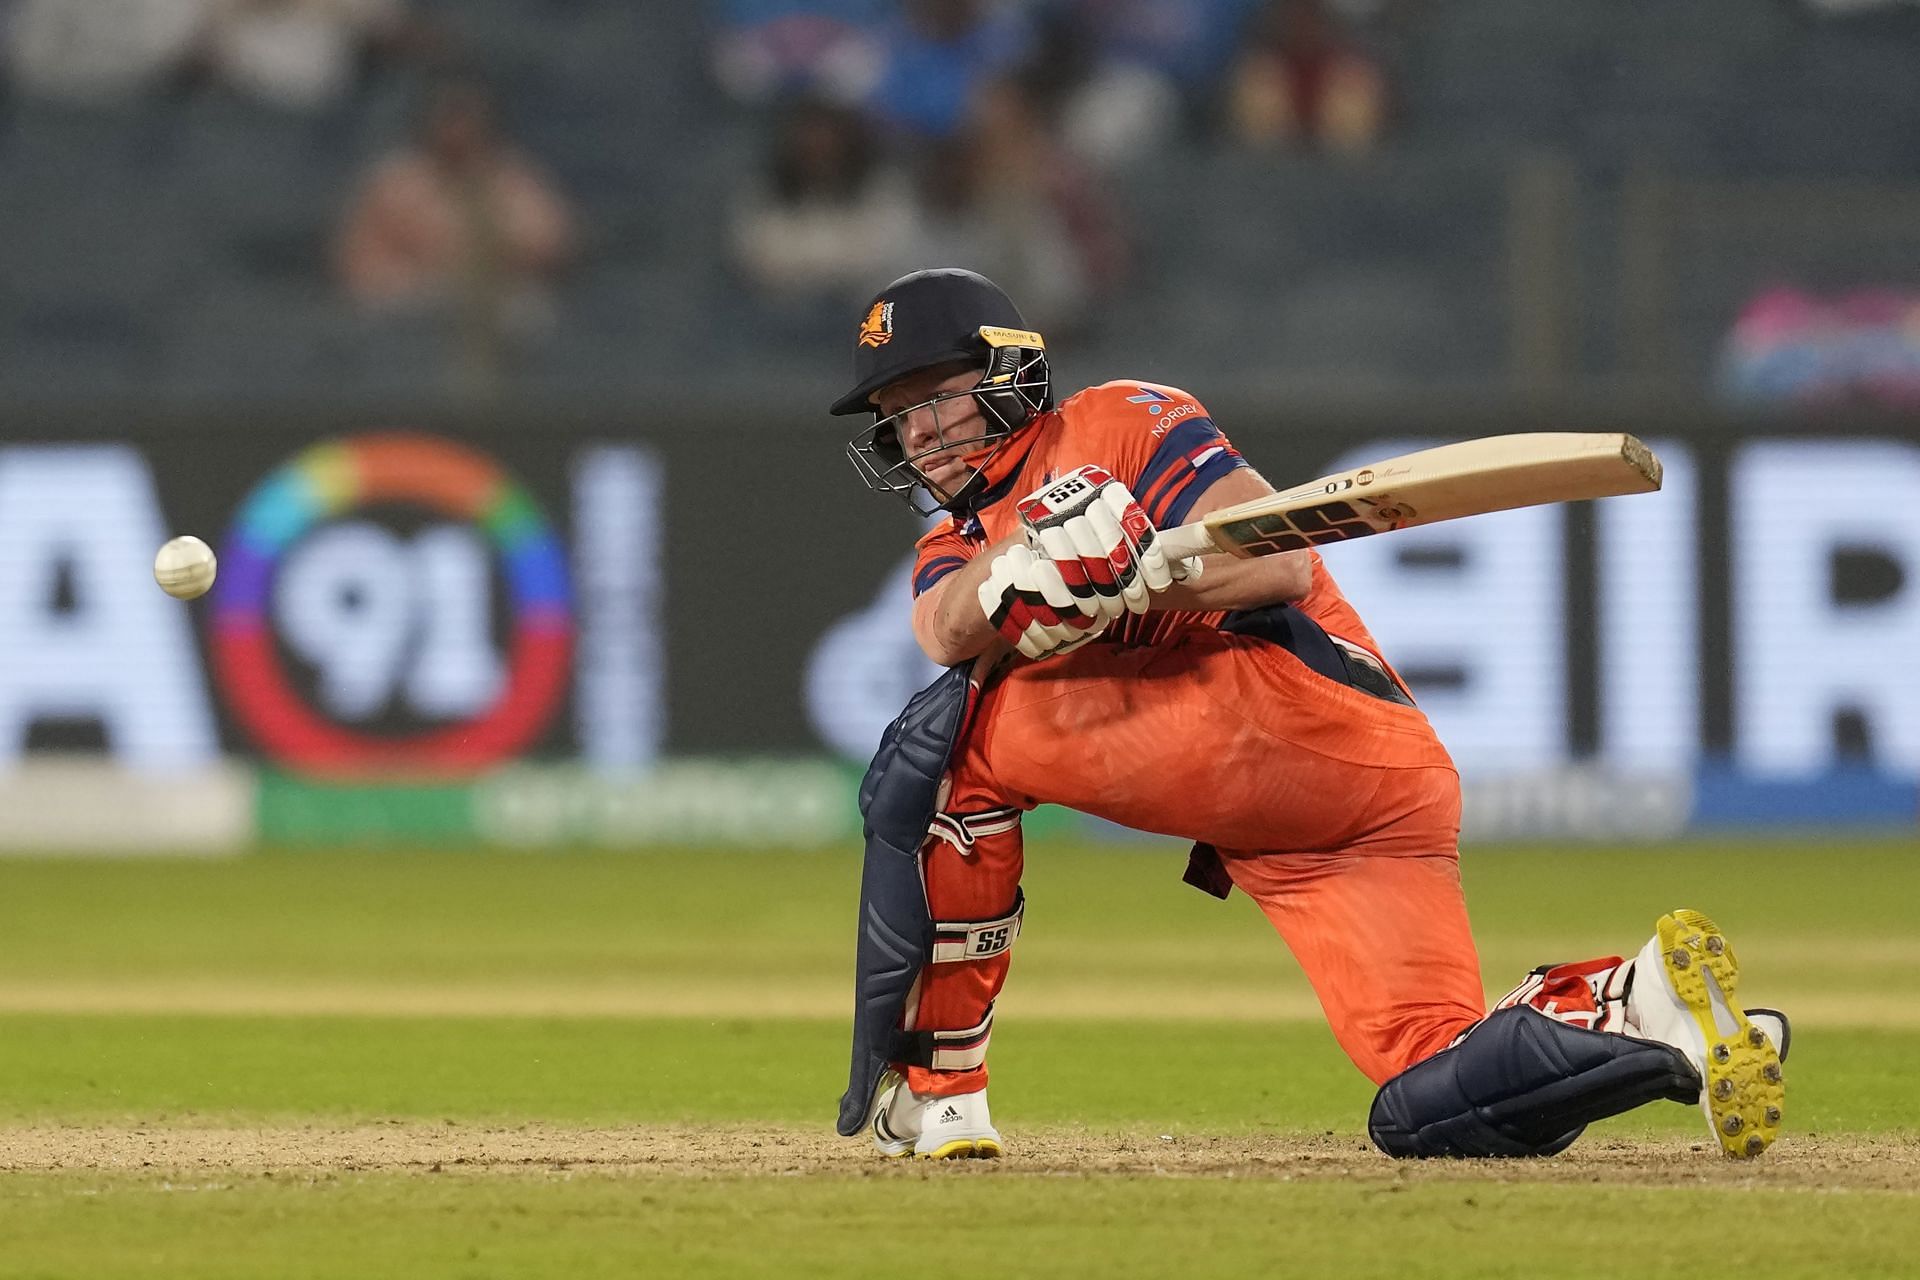 Sybrand Engelbrecht is the Netherlands' leading run-scorer this World Cup. 